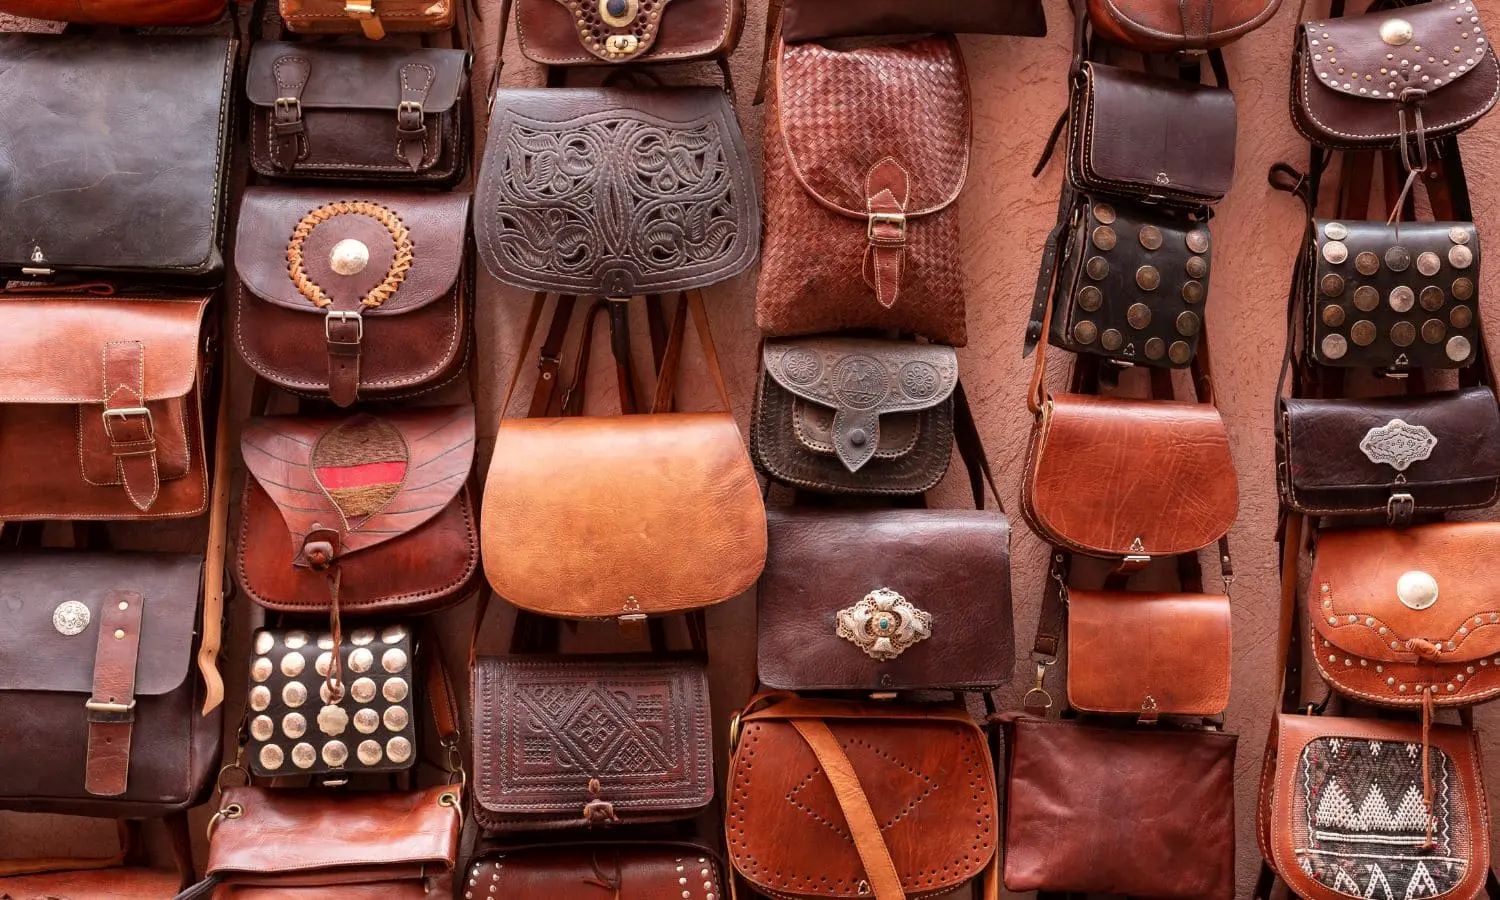 How To Store Leather Bags